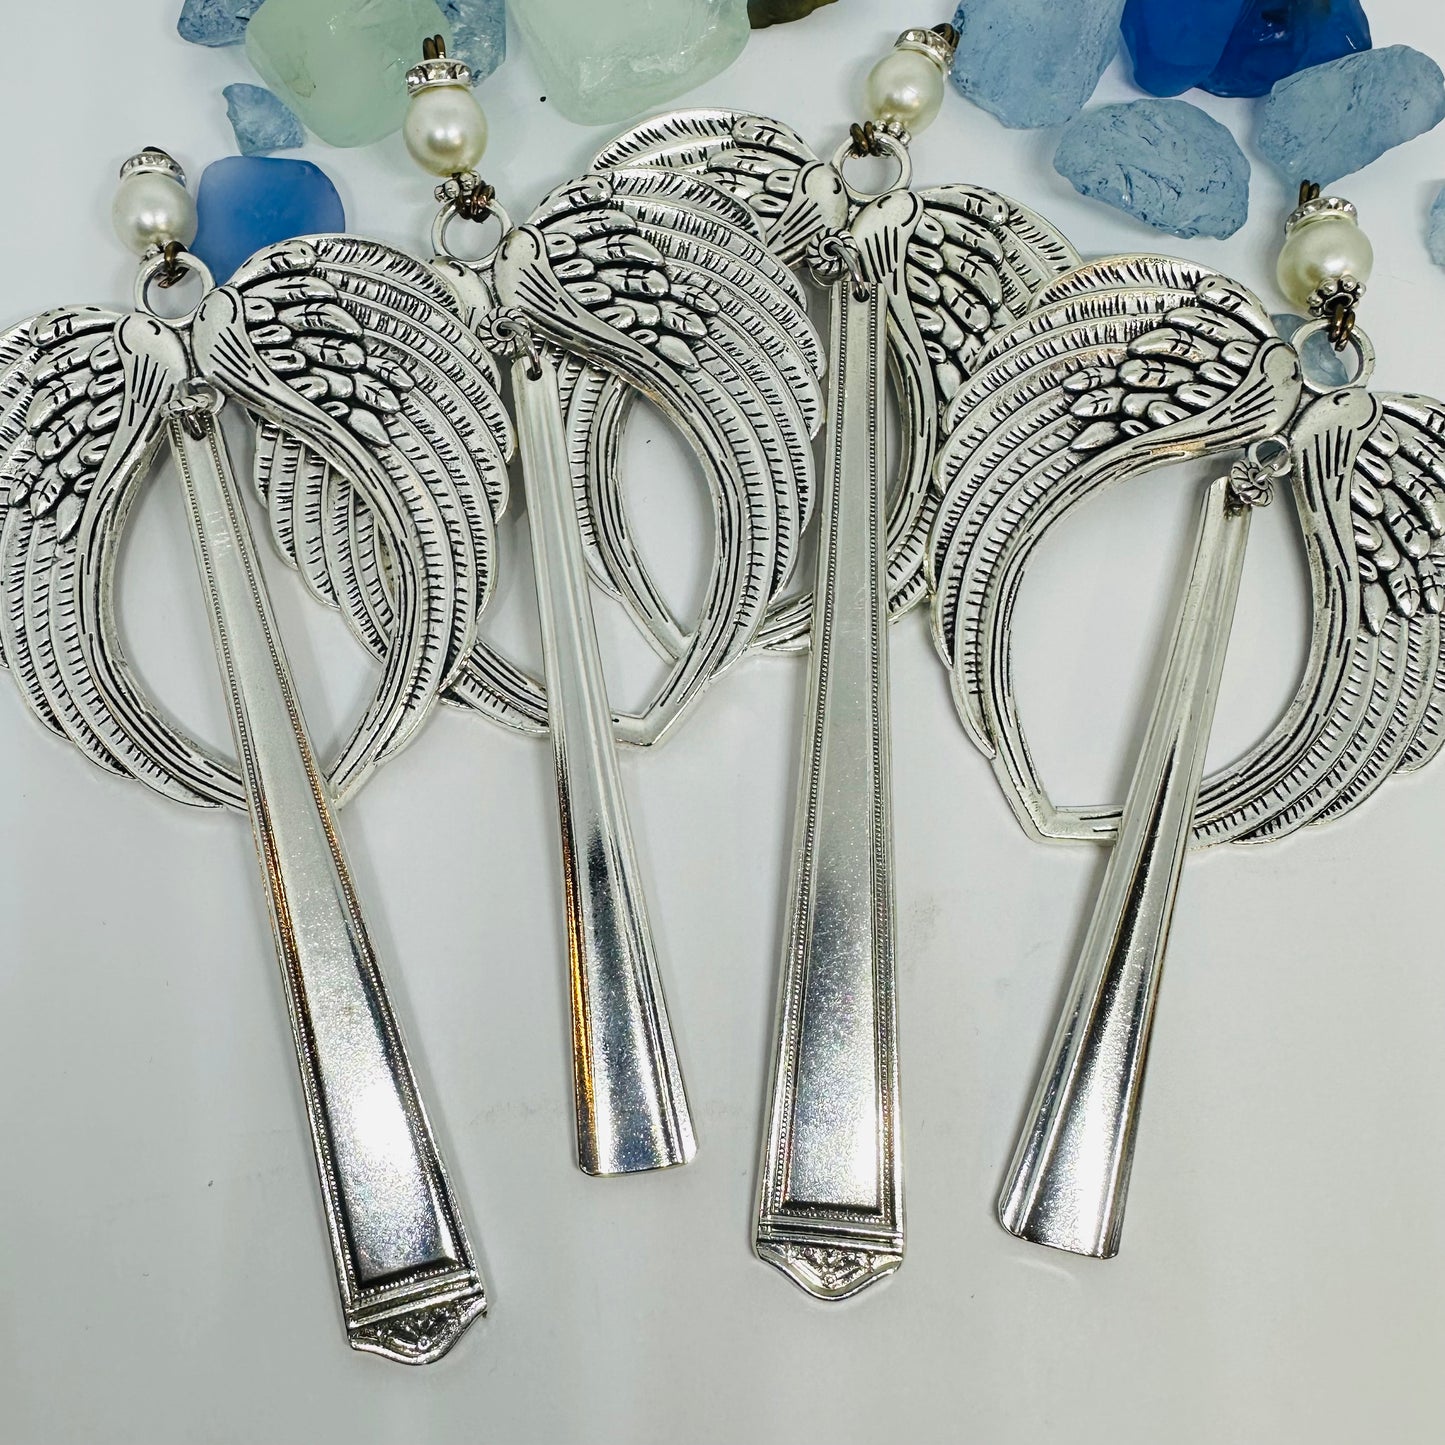 Angel Ornaments and Pendants made with Vintage Silverware